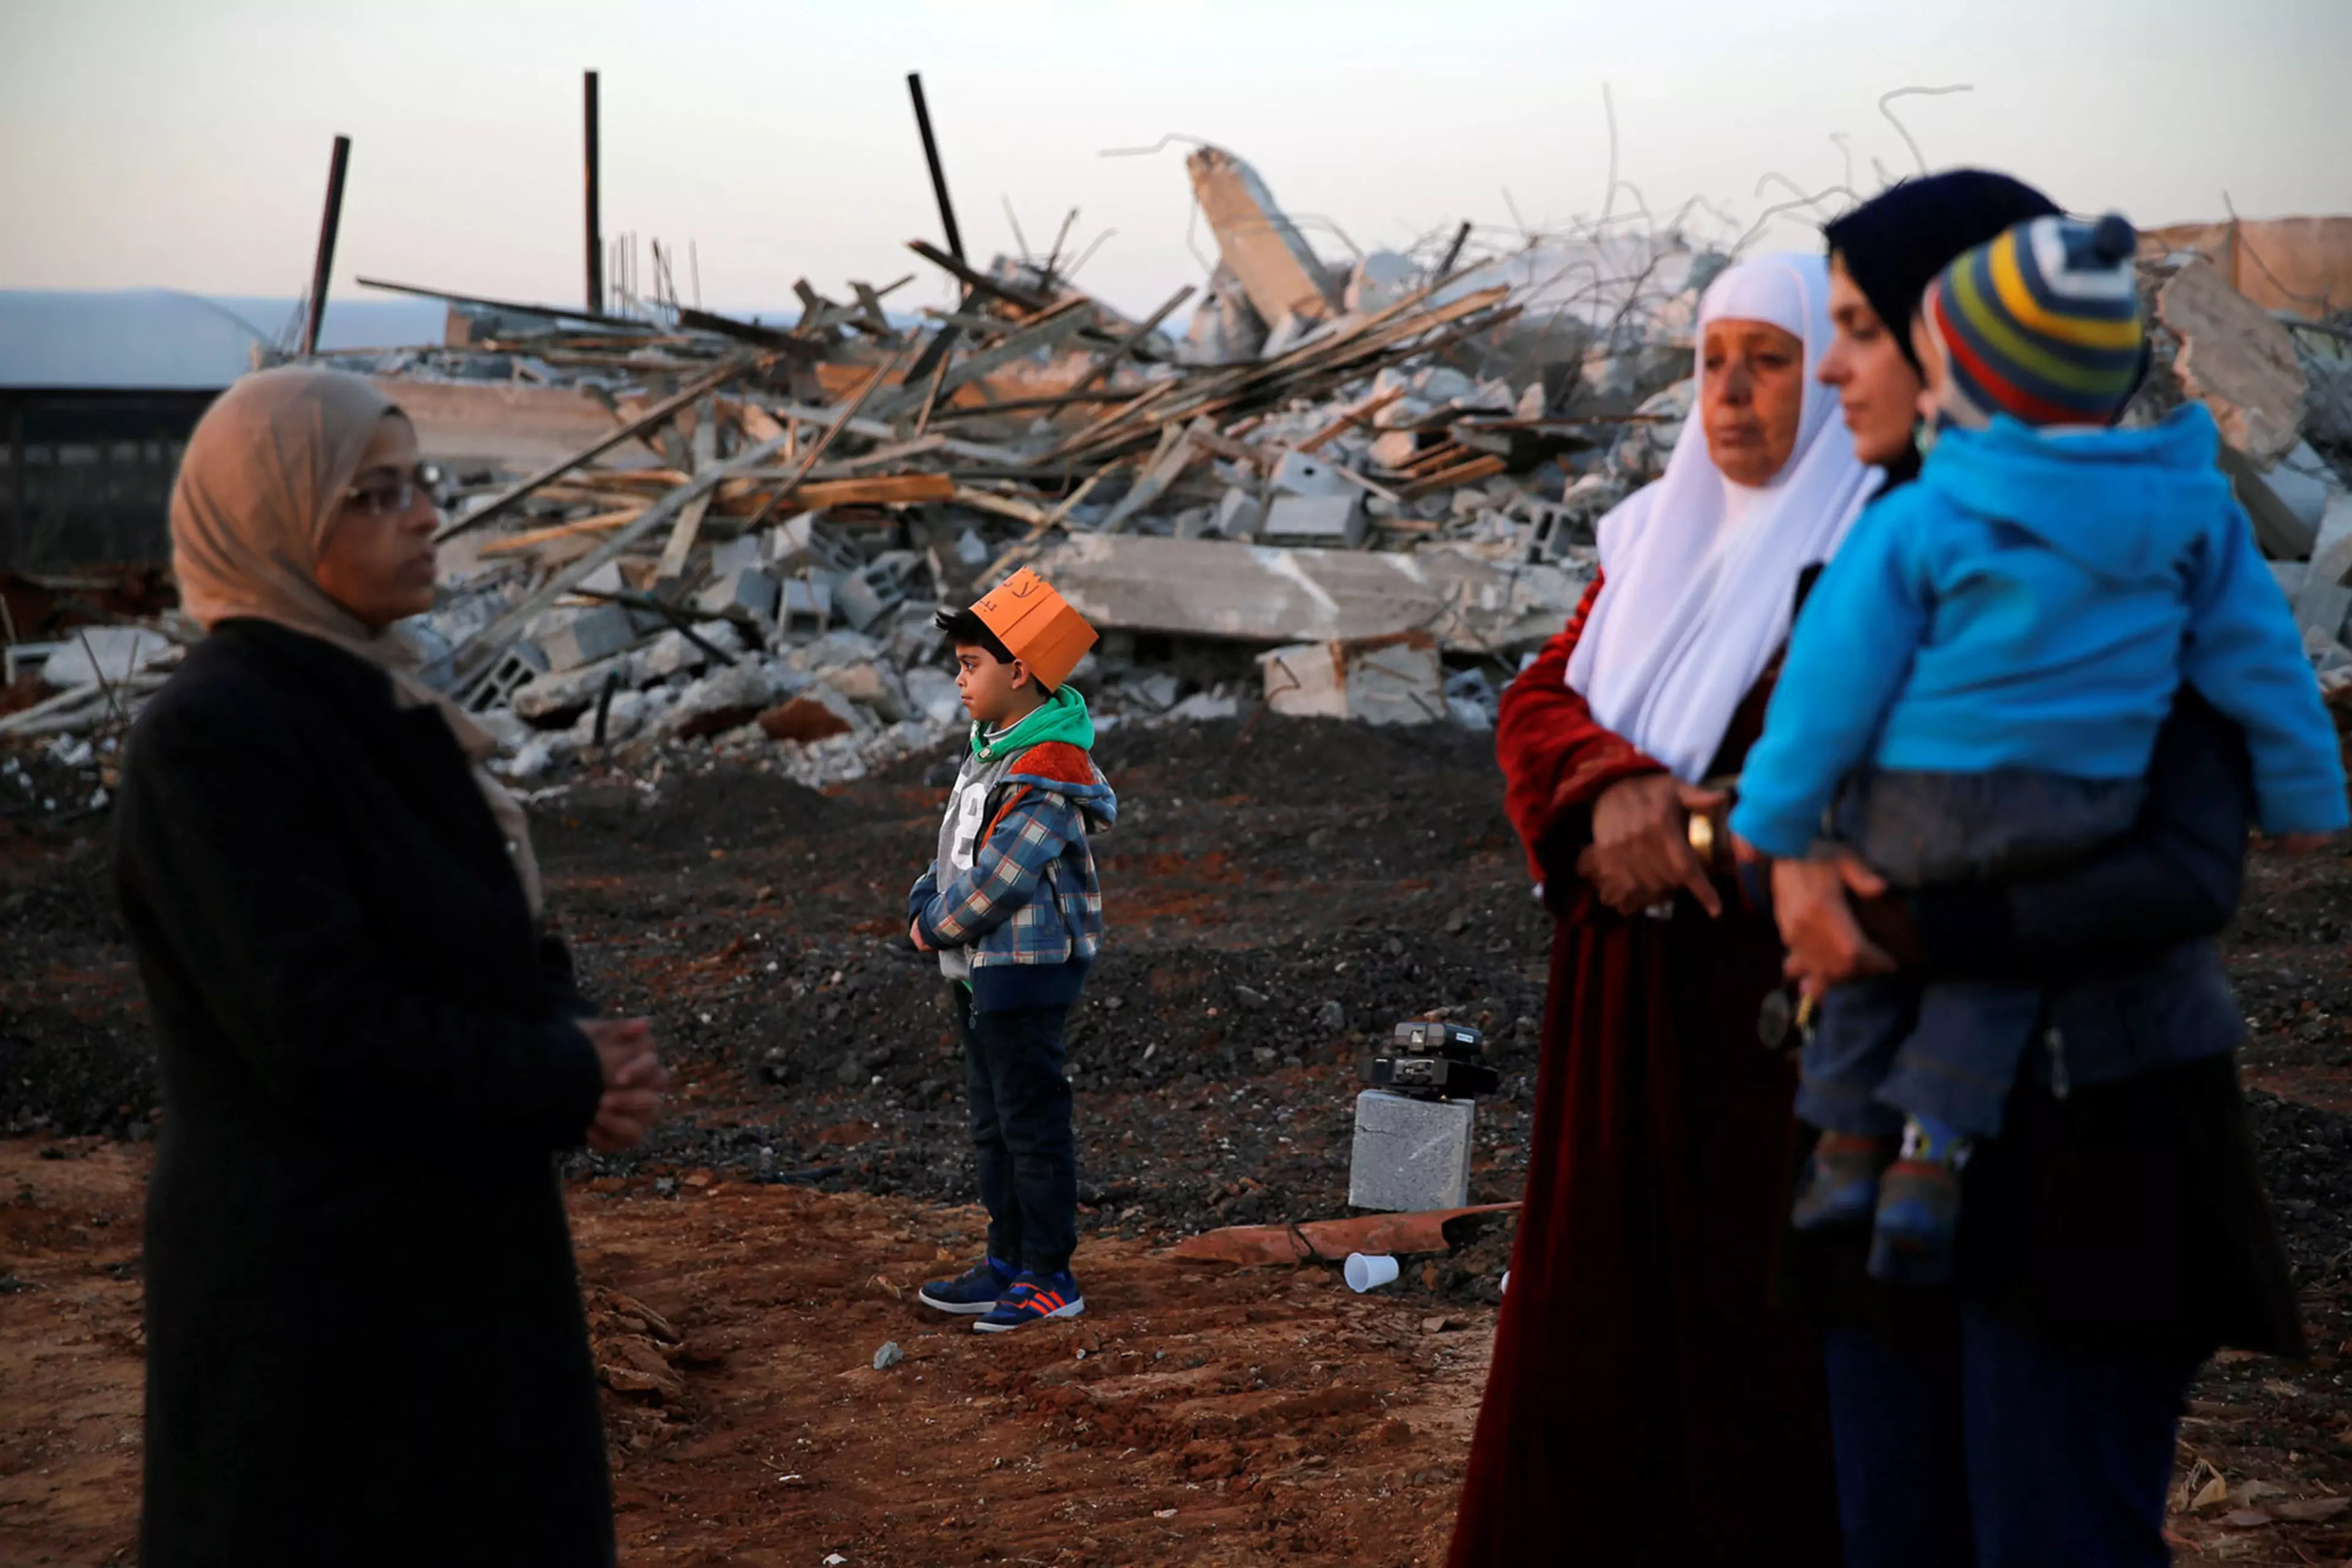 Arab citizens of Israel stand near demolished houses in the northern city of Qalansawe.